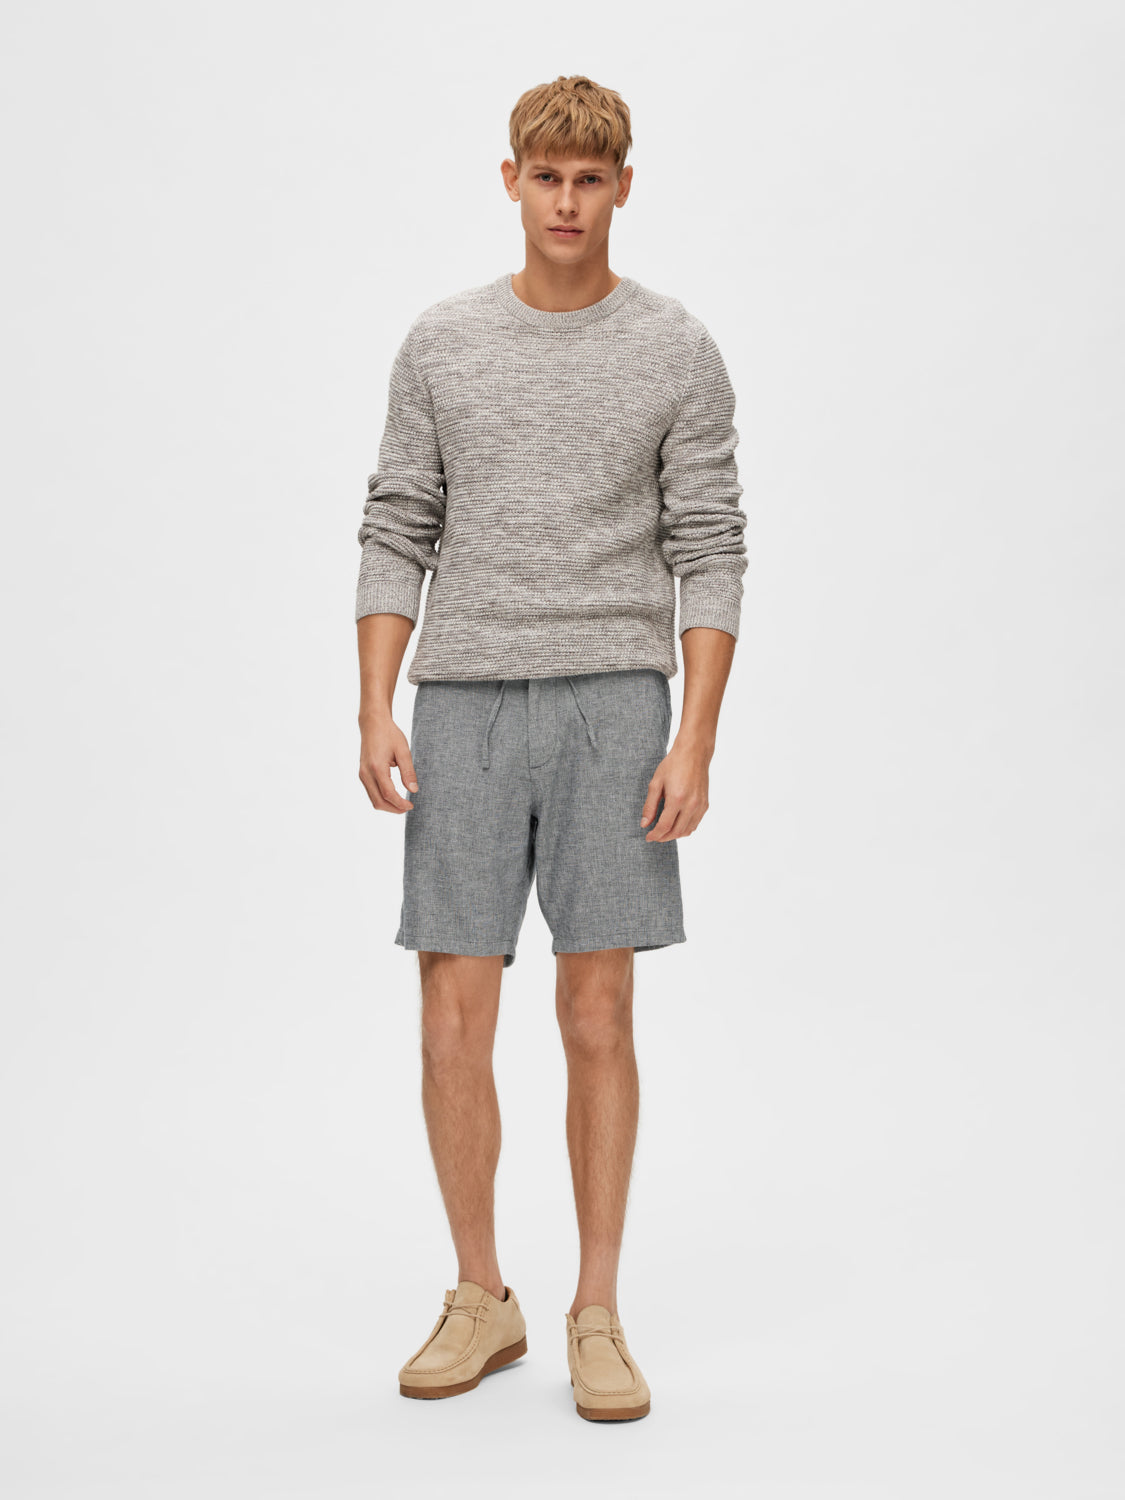 SELECTED HOMME - REGULAR-BRODY Shorts - Sky Captain